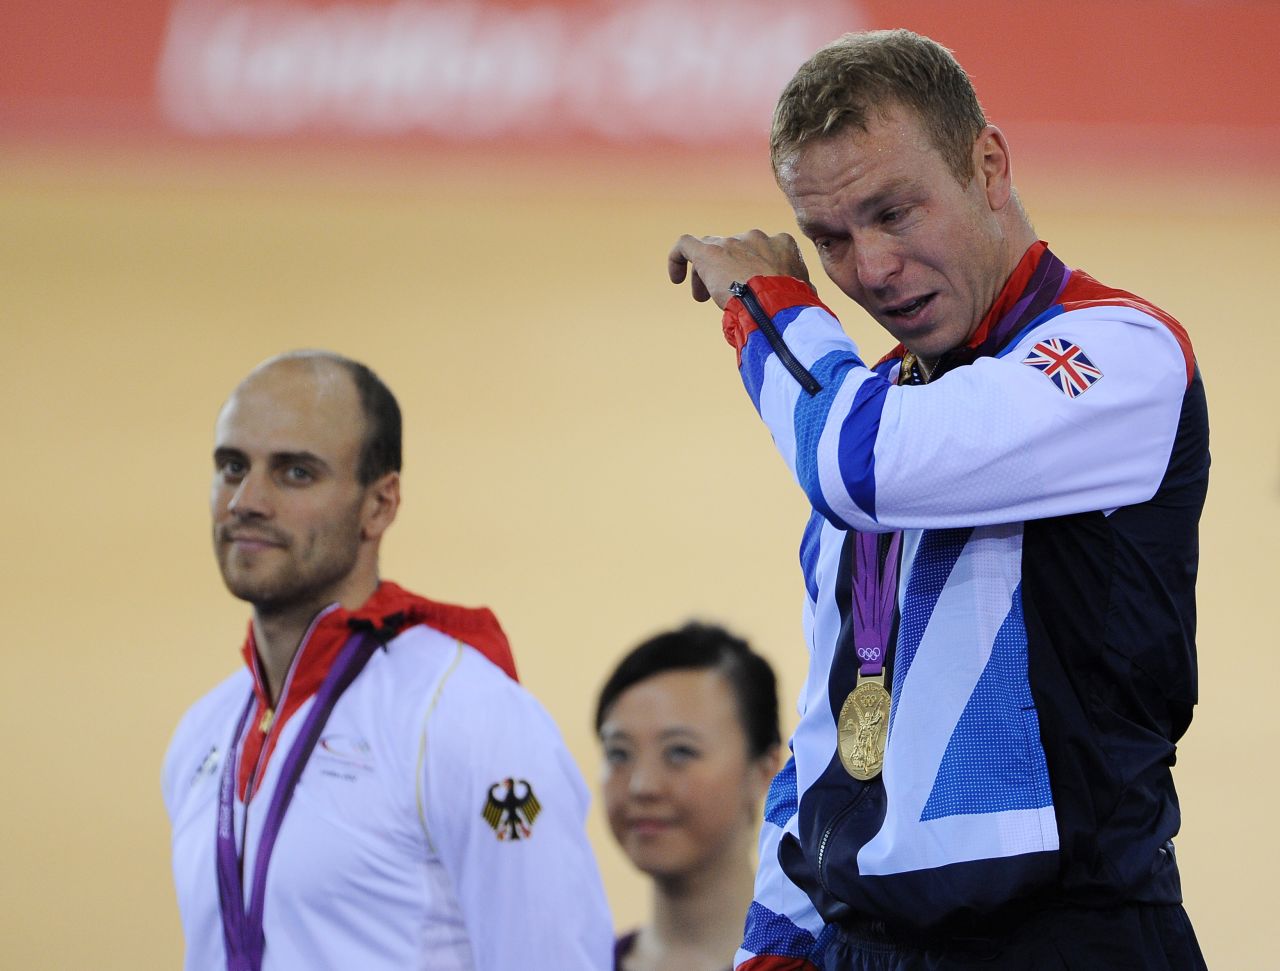 Gold medalist Sir Chris Hoy of Great Britain, right, tears up alongside silver medalist Maximilian Levy during the medal ceremony for the men's keirin track cycling final.